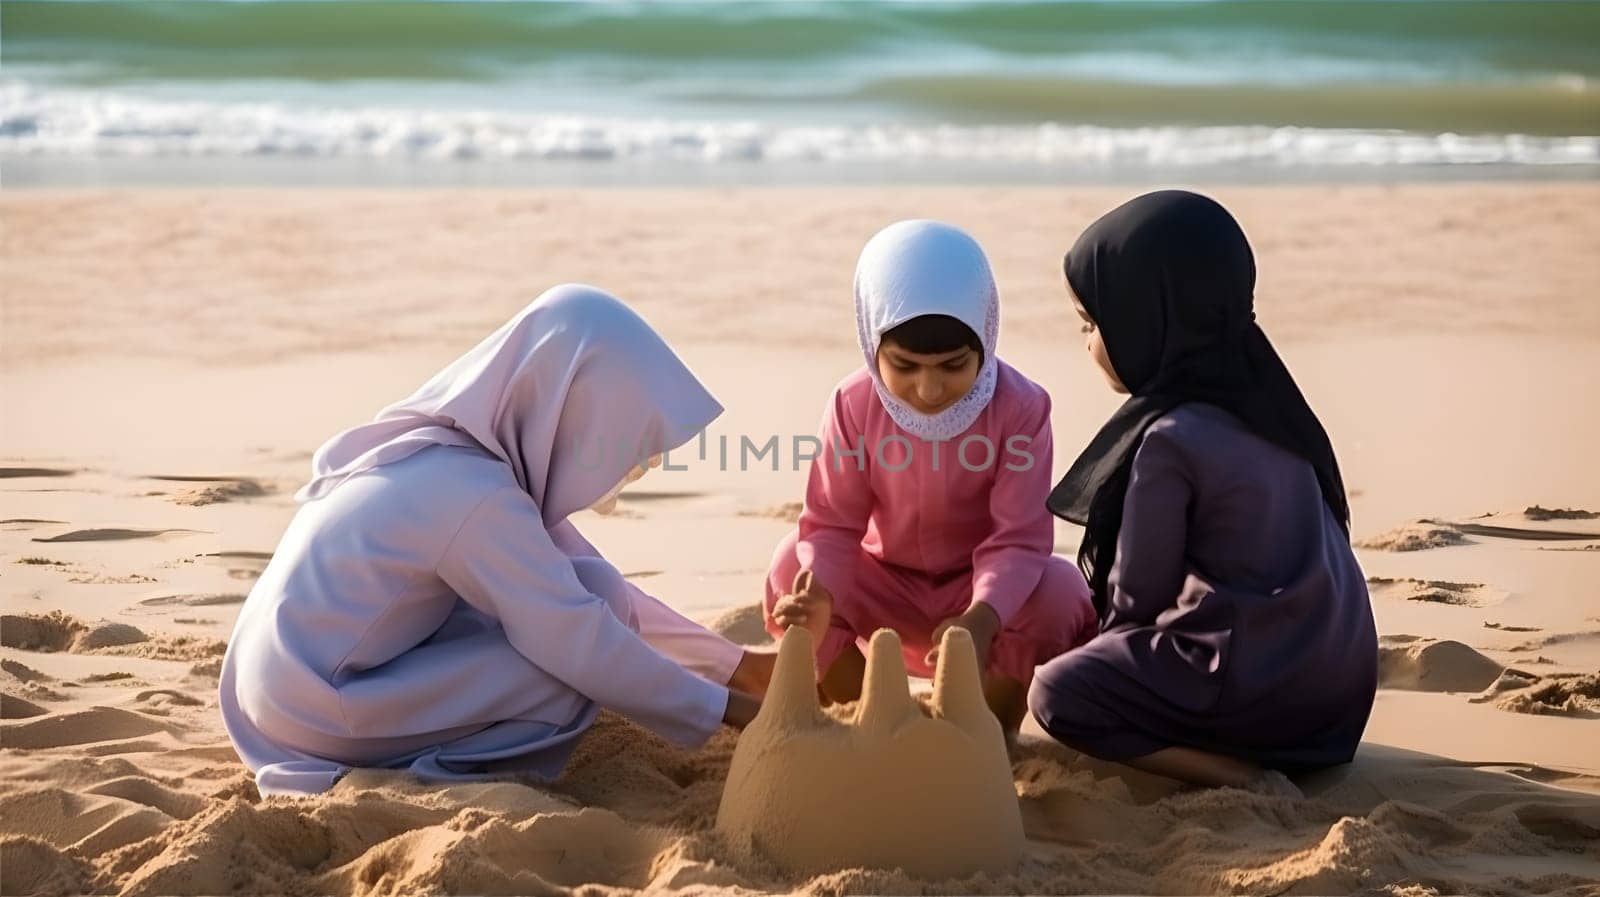 Muslim hildren making sand castles on the beach. Neural network generated in May 2023. Not based on any actual person, scene or pattern.